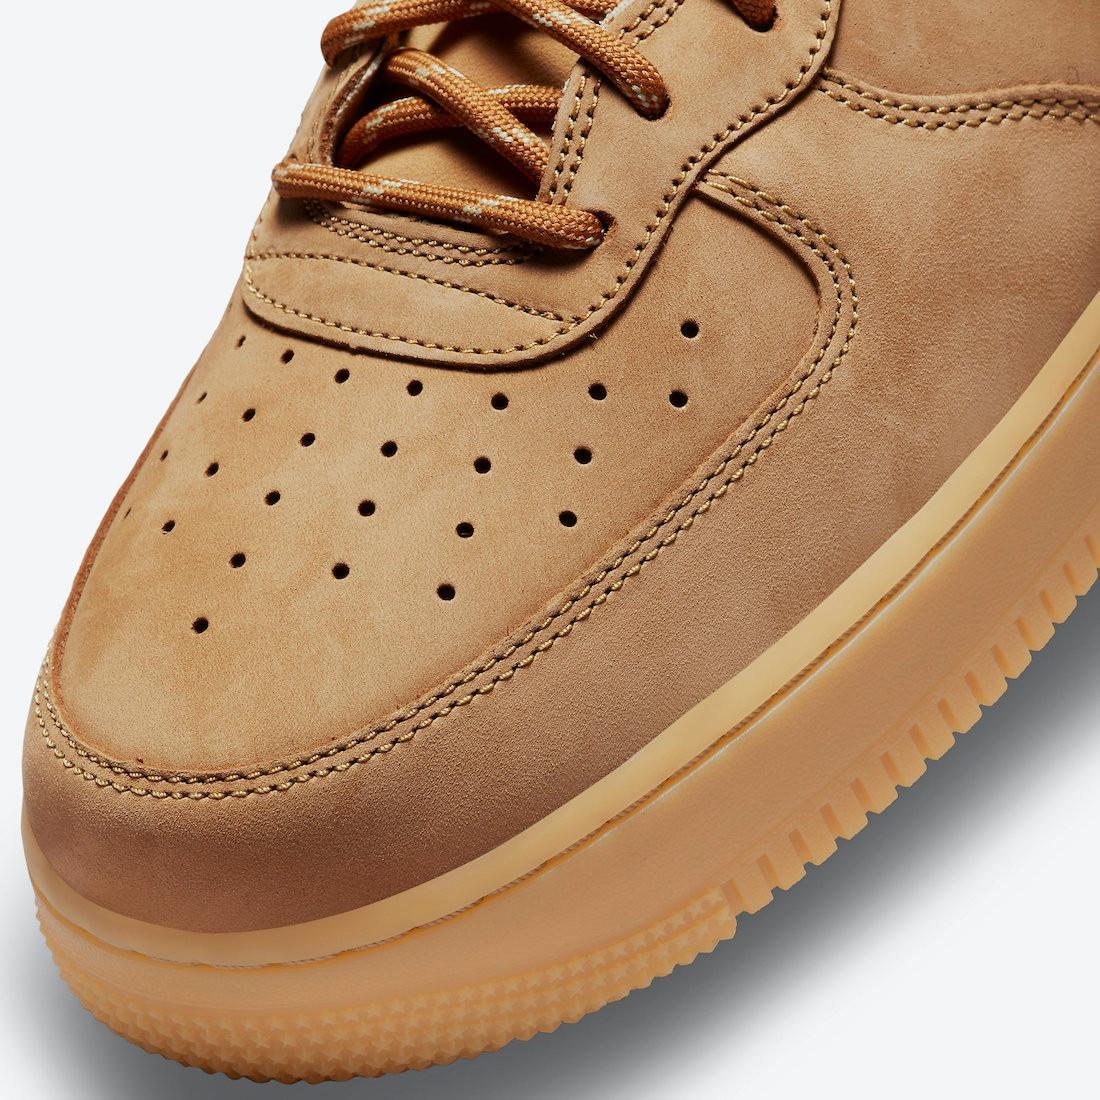 Timberland nikes (AF1 flax) : r/Sneakers